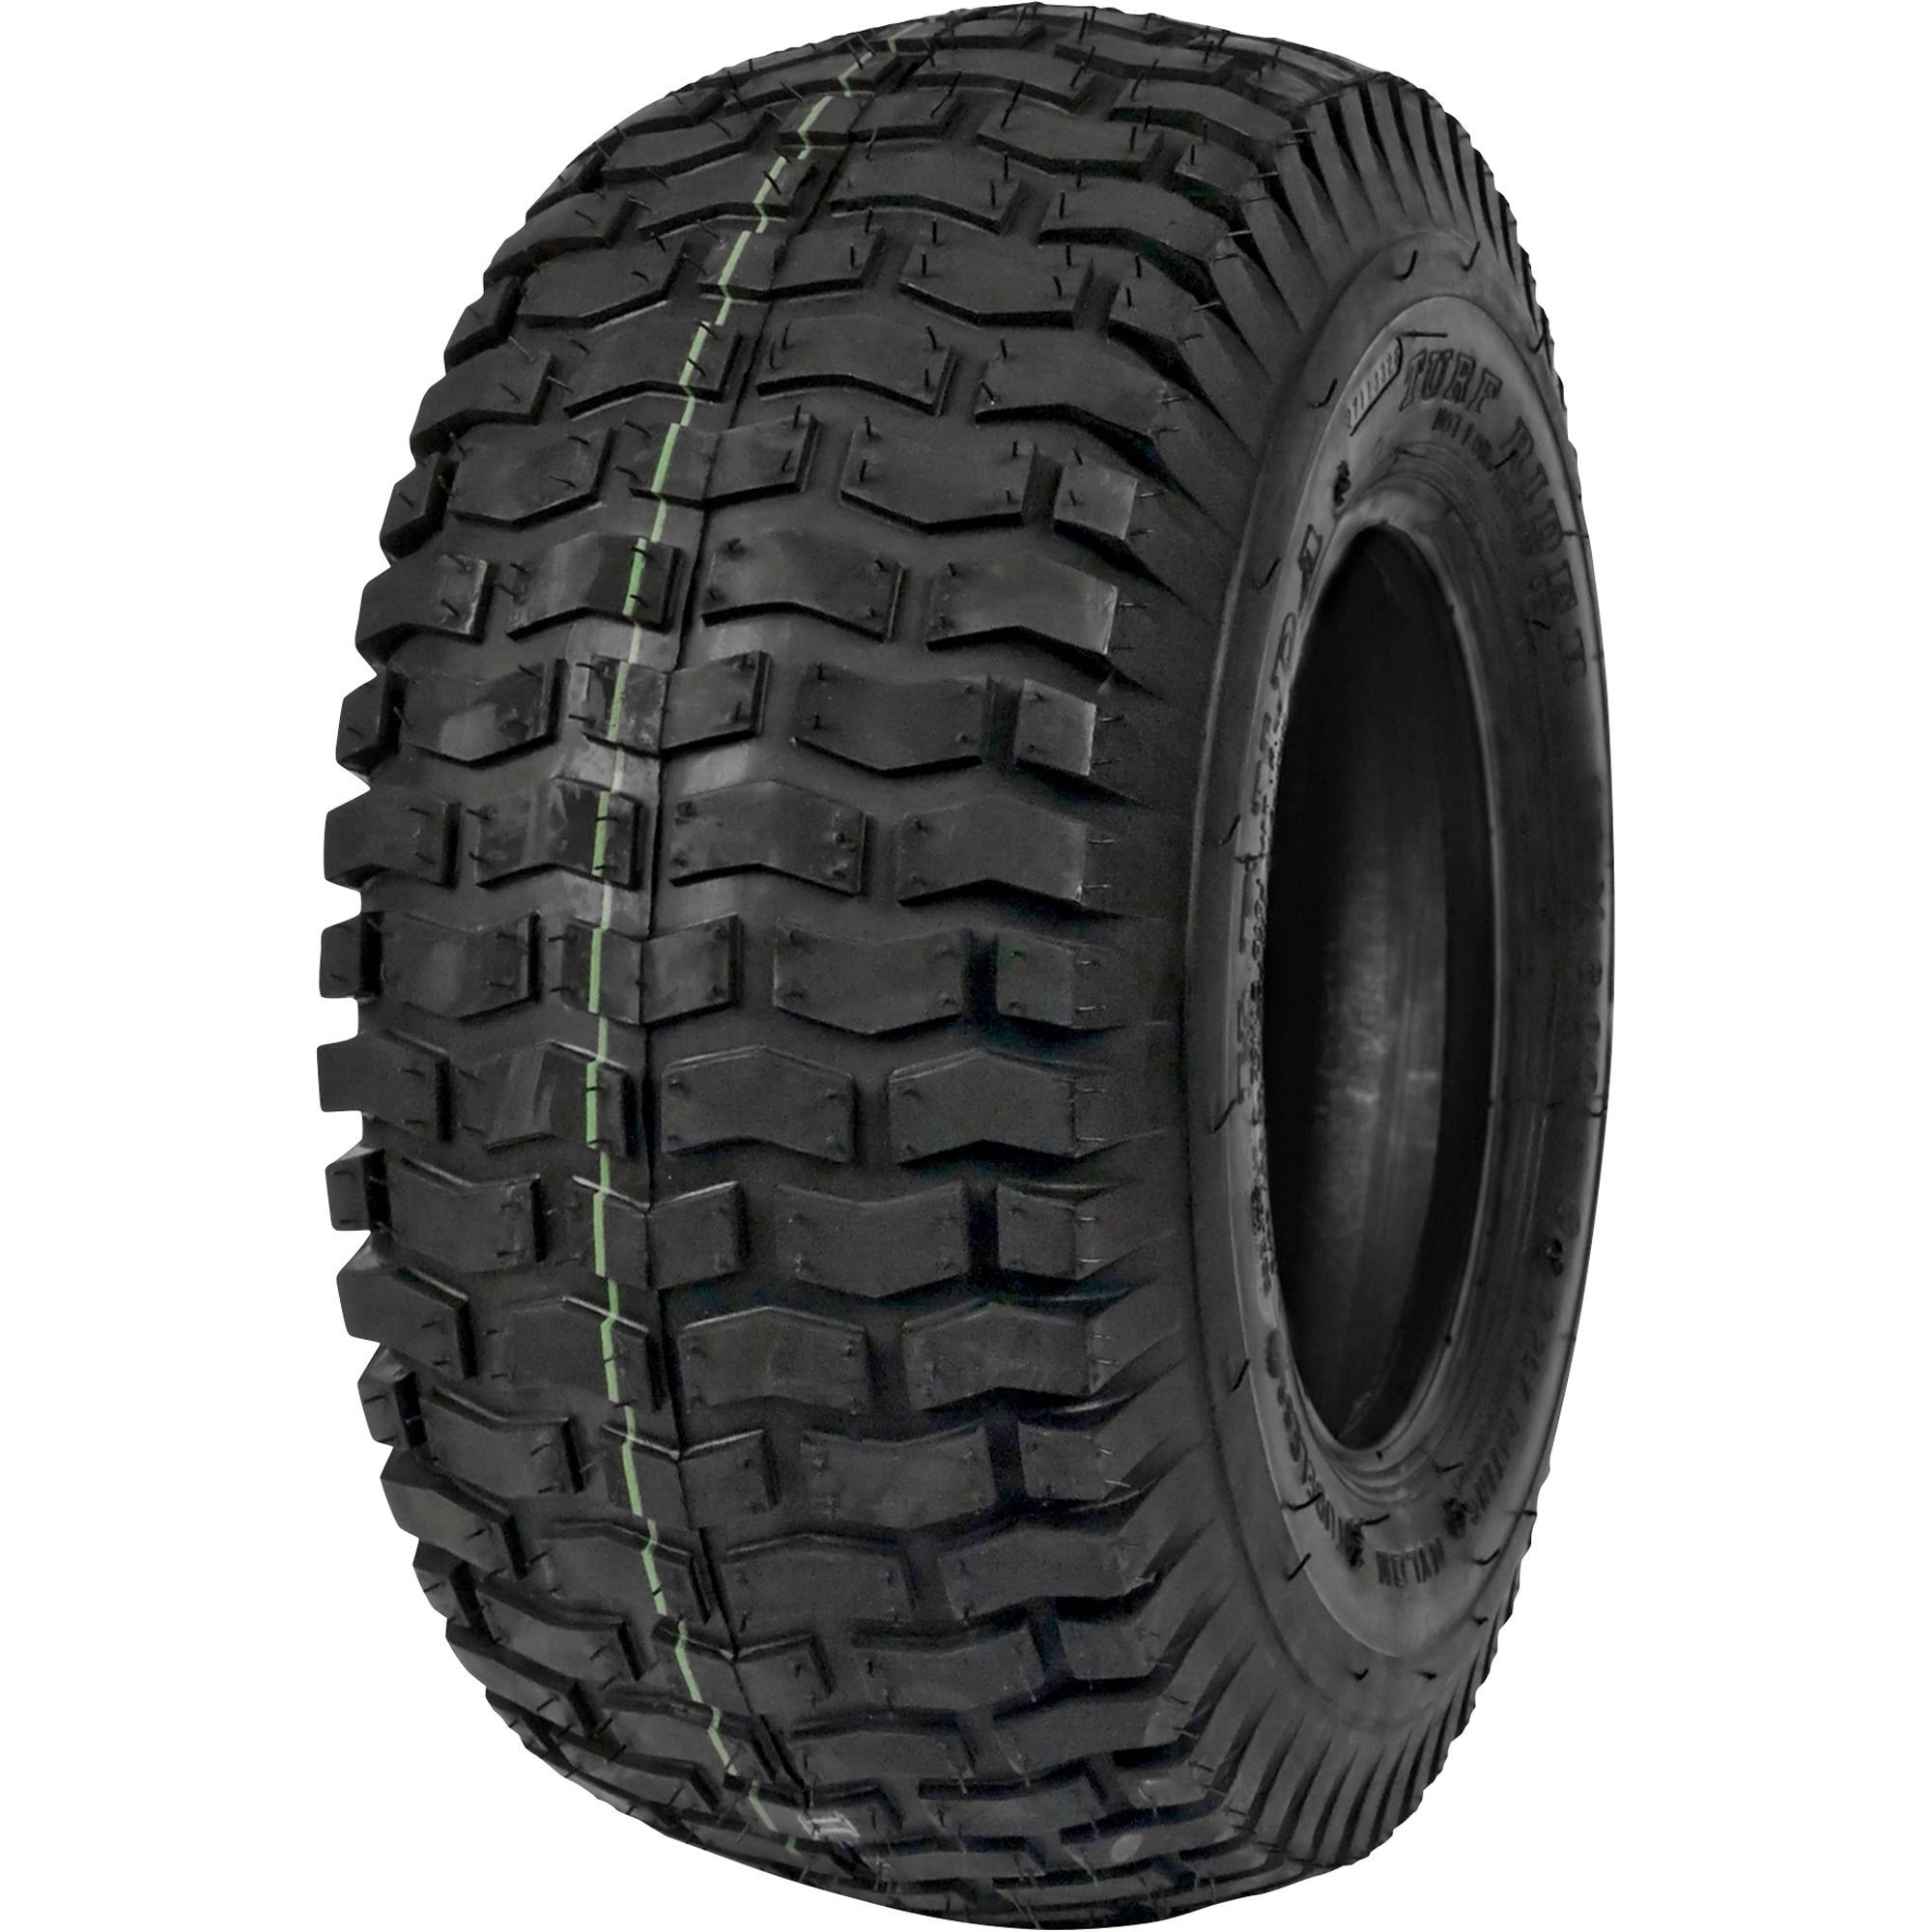 Kenda Lawn and Garden Tractor Tubeless Replacement Turf Tire â 15 x 600-6